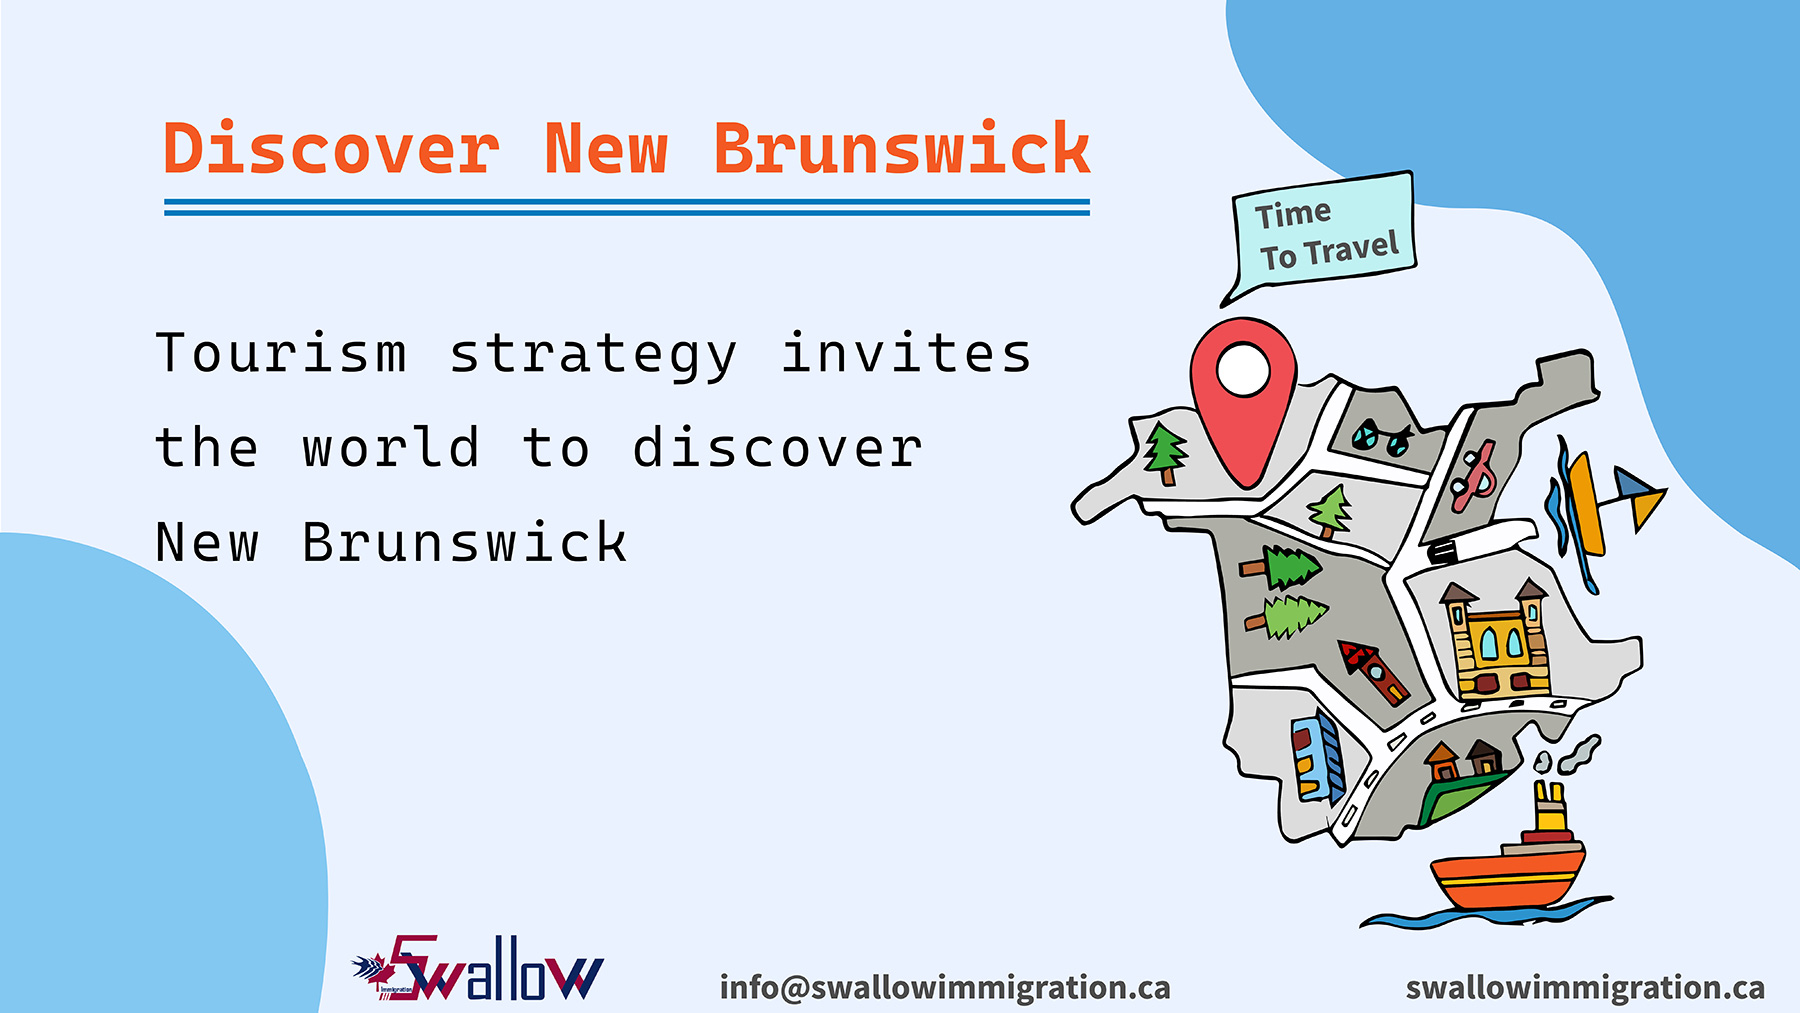 Tourism strategy invites the world to discover New Brunswick